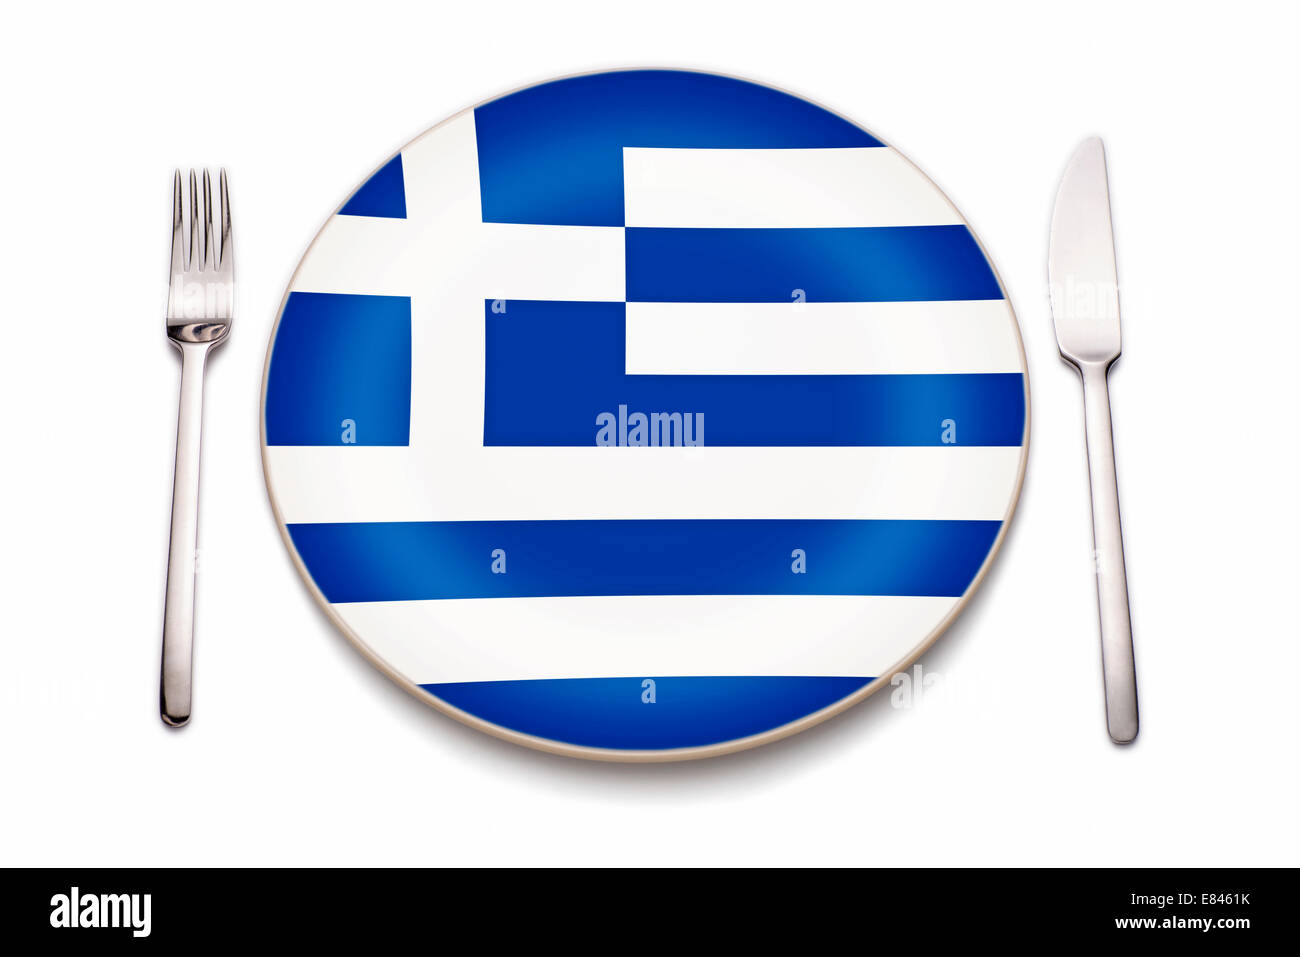 Knife, fork and a plate in the colors of the Greece flag. Stock Photo